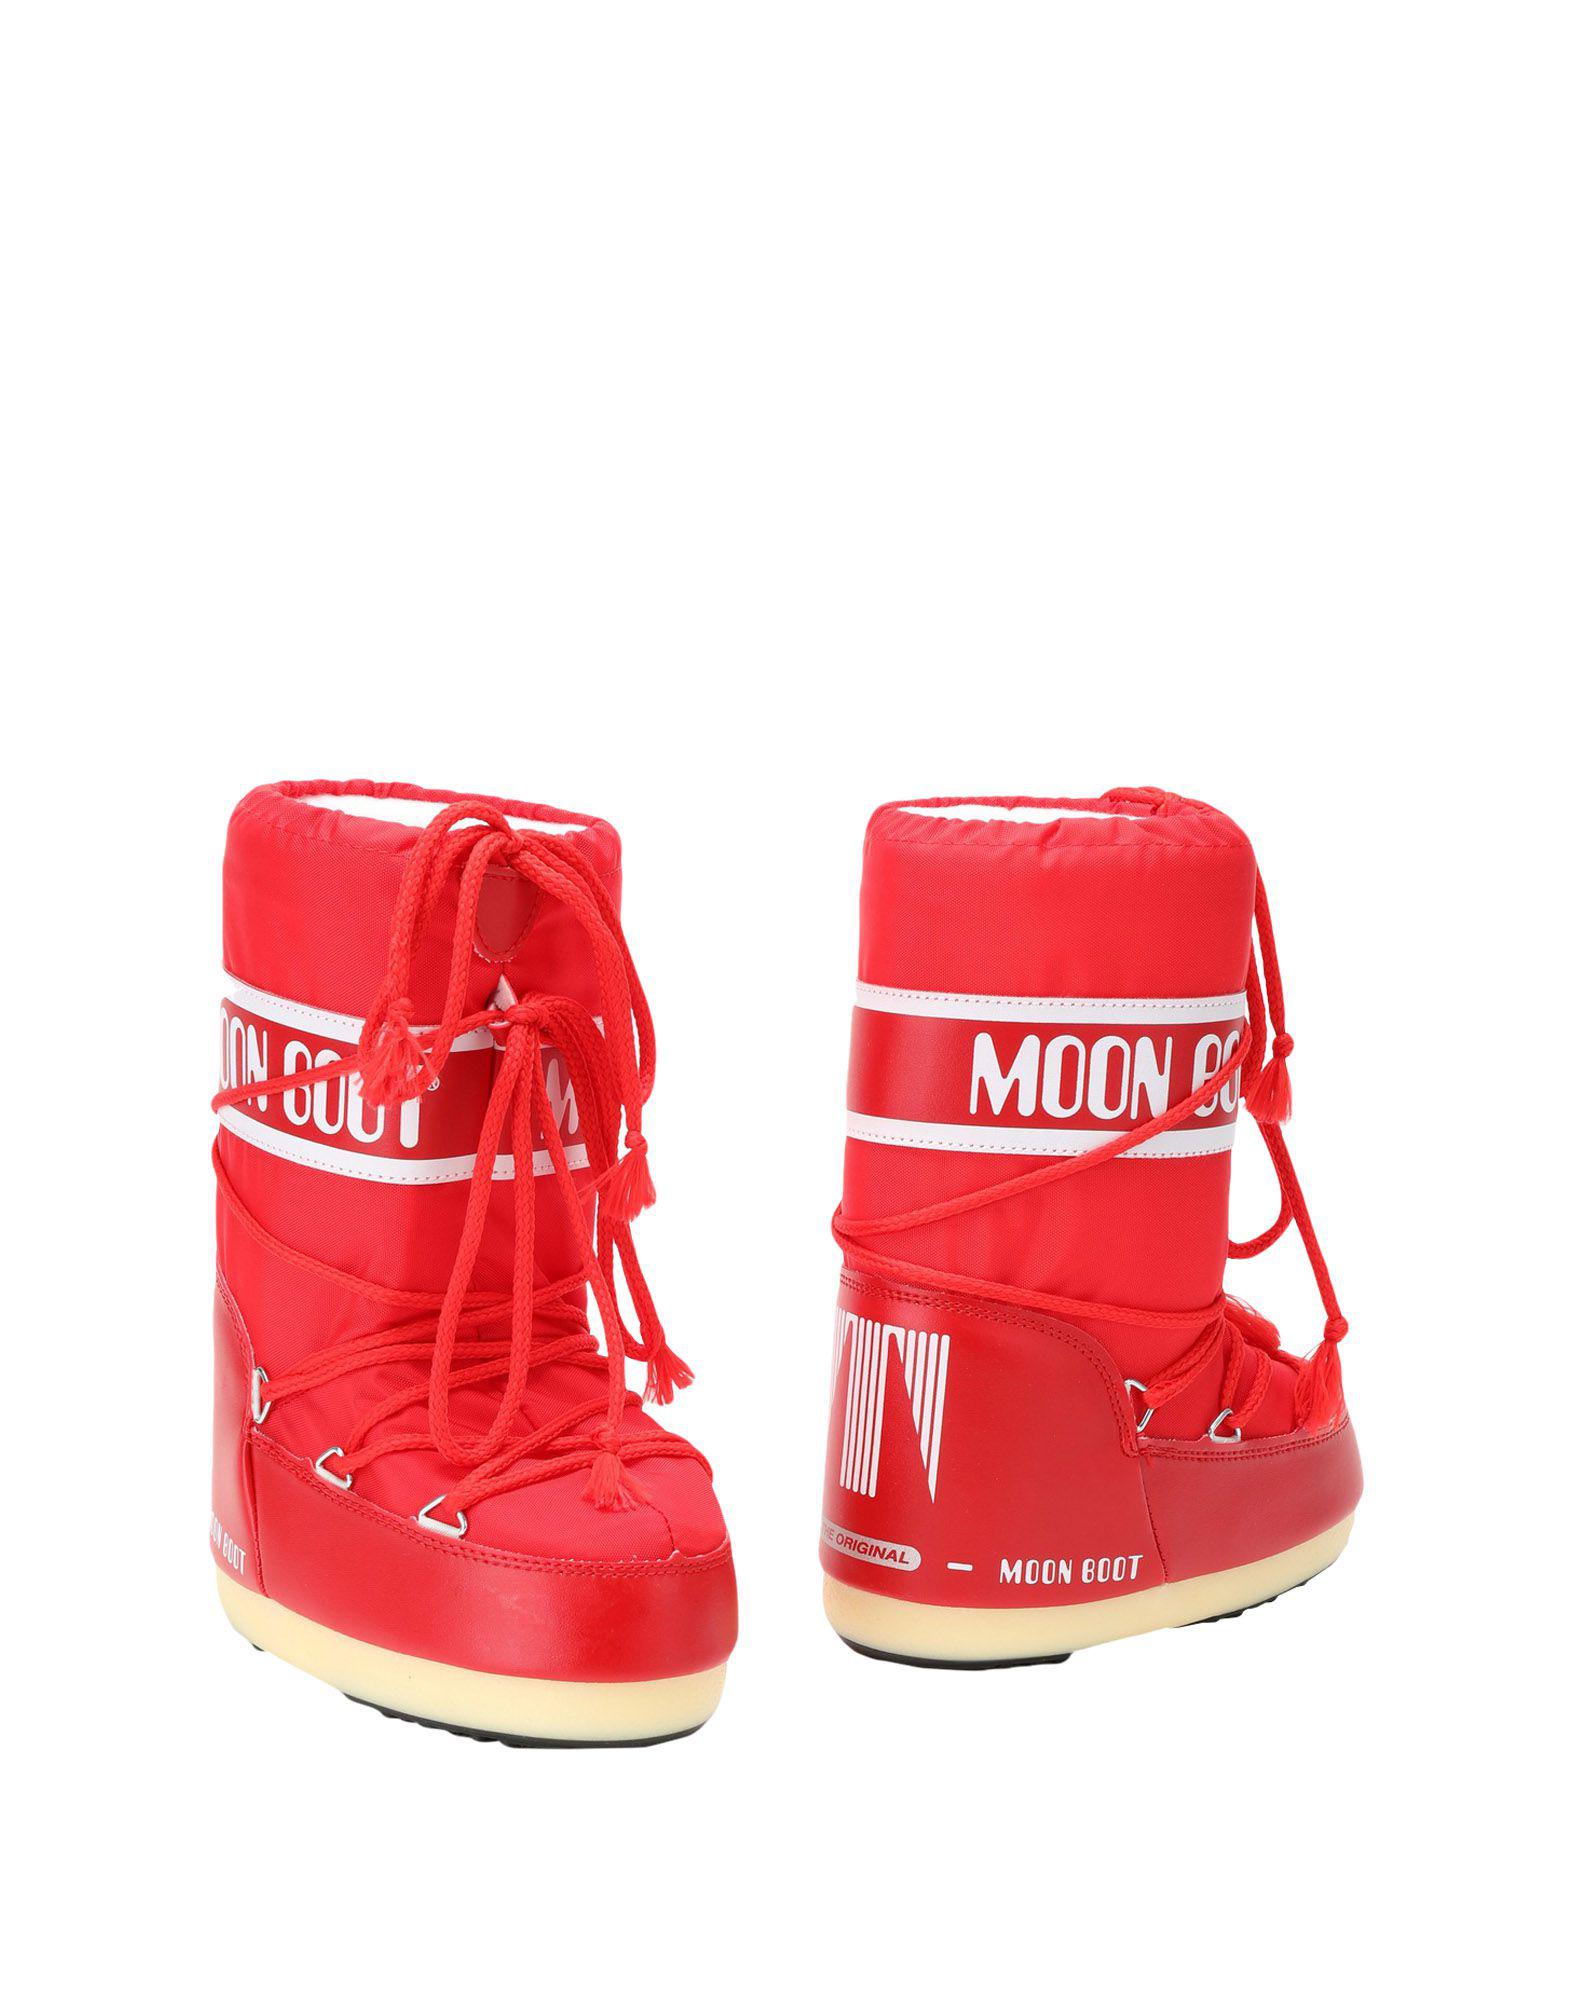 Moon Boot Classic Nylon Waterproof Snow Boots in Red - Lyst